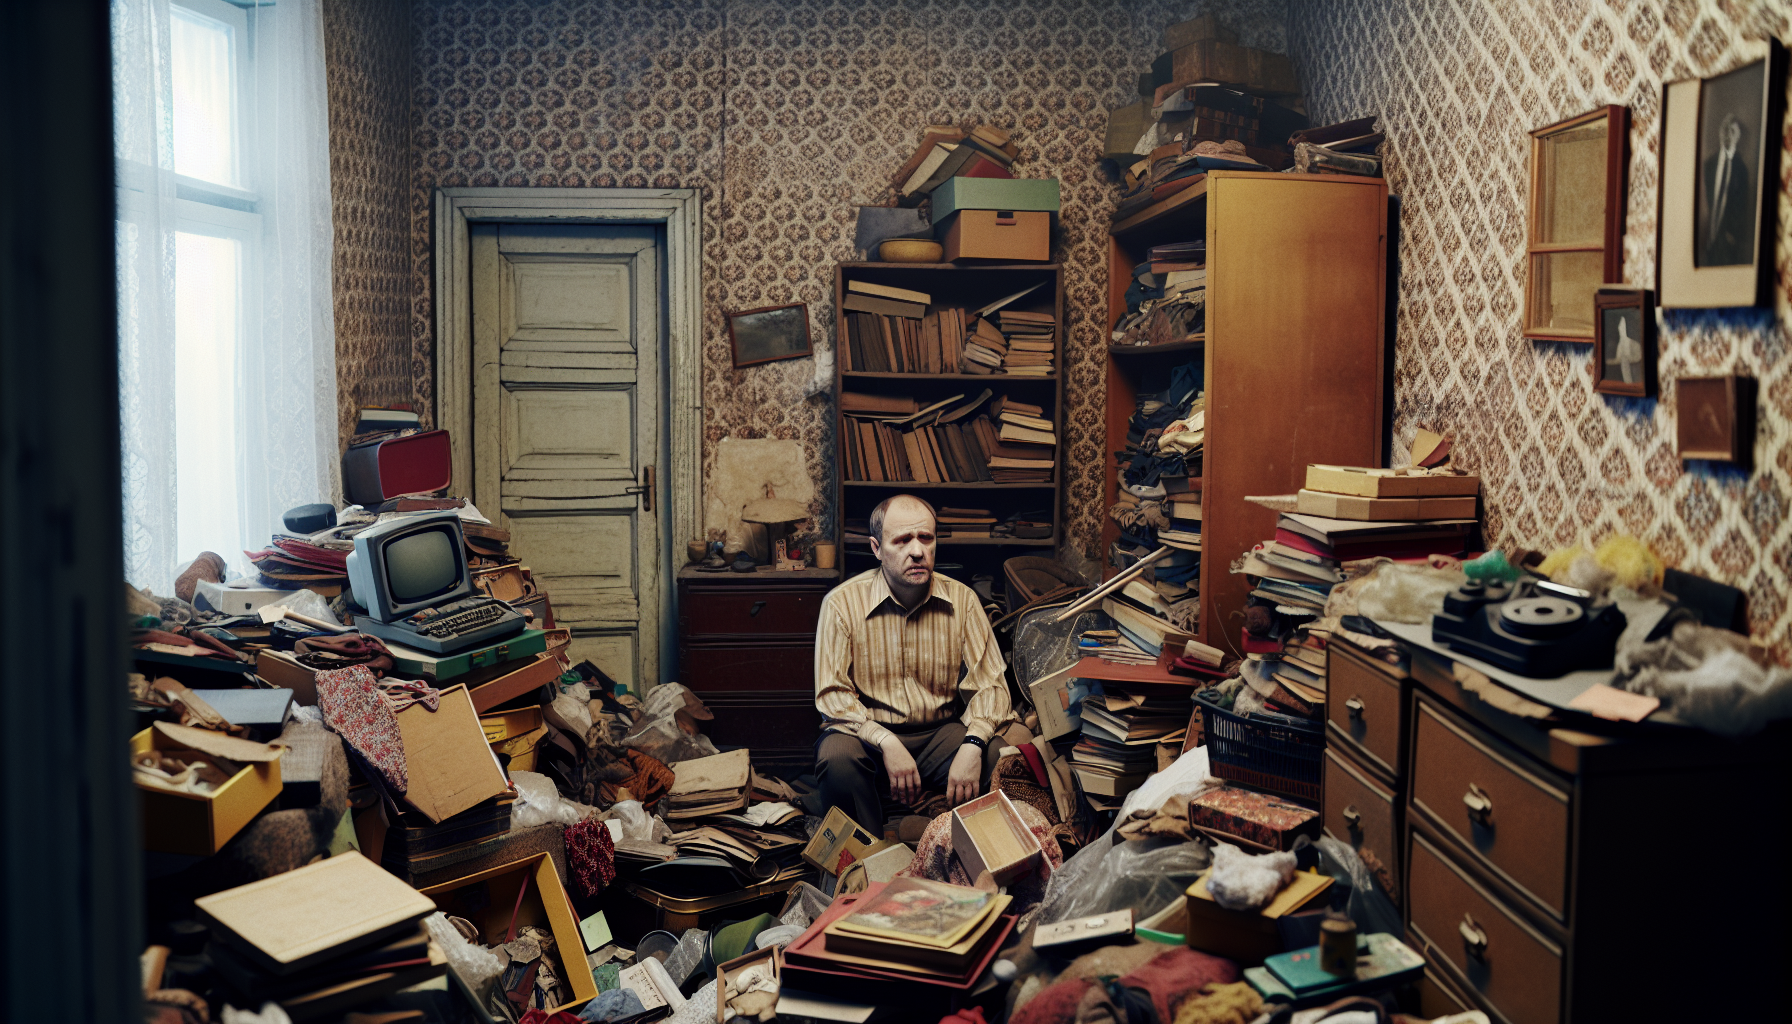 A cluttered room with various items, representing hoarding behavior as a coping mechanism